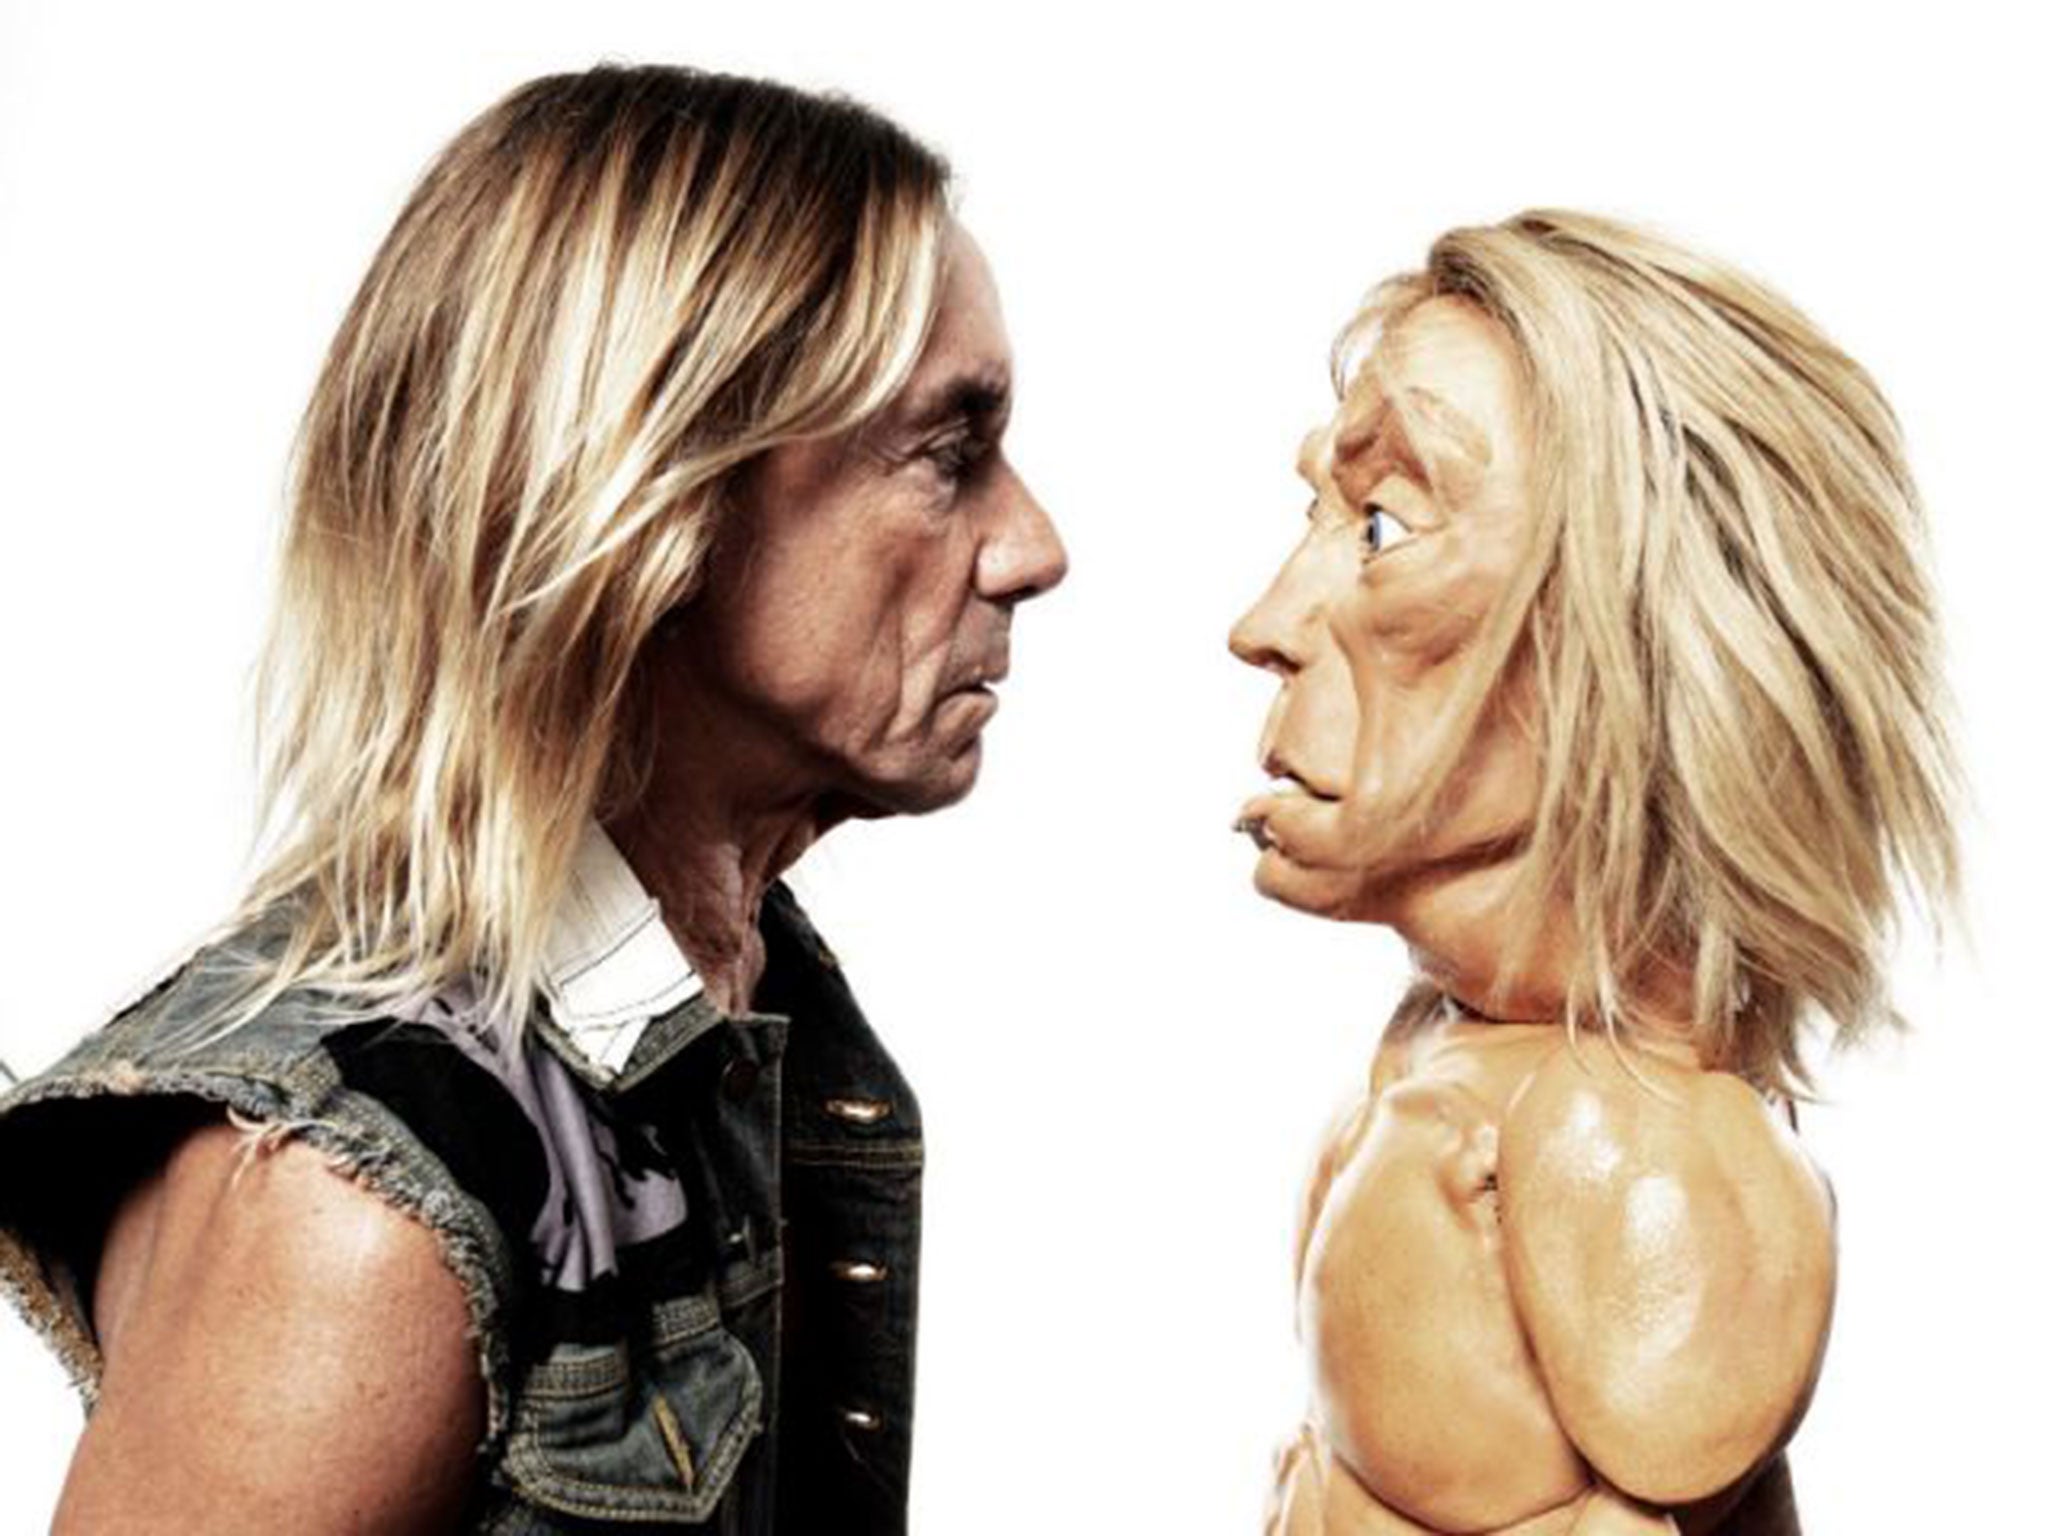 Iggy Pop fronted an ad campaign for  Swiftcover car insurance